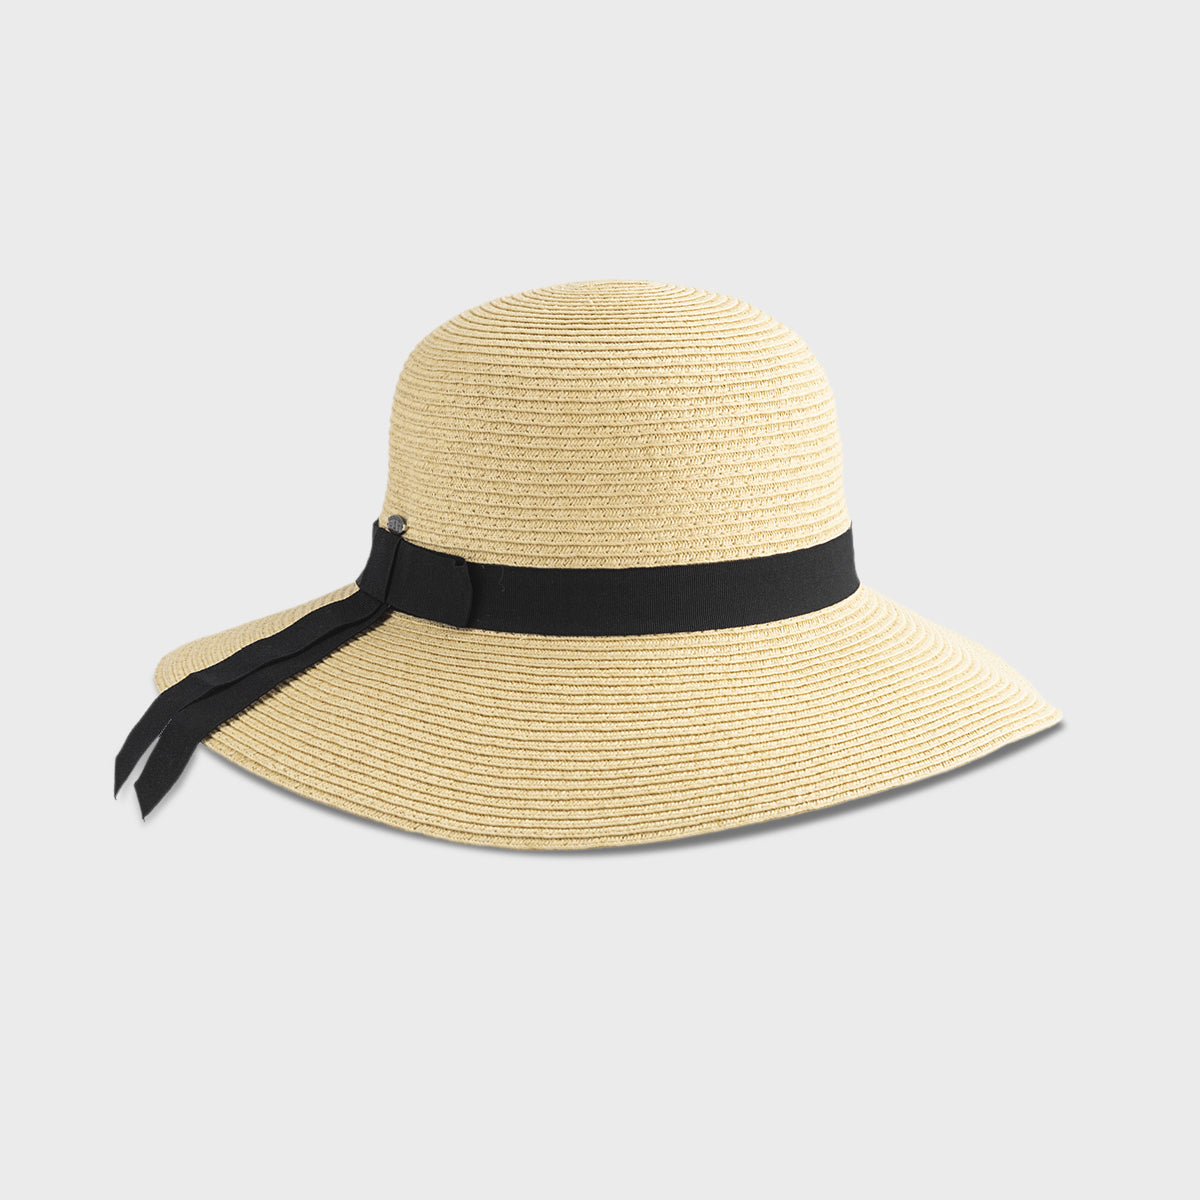 CELMA - FLOPPY HAT WITH RIBBON KNOT